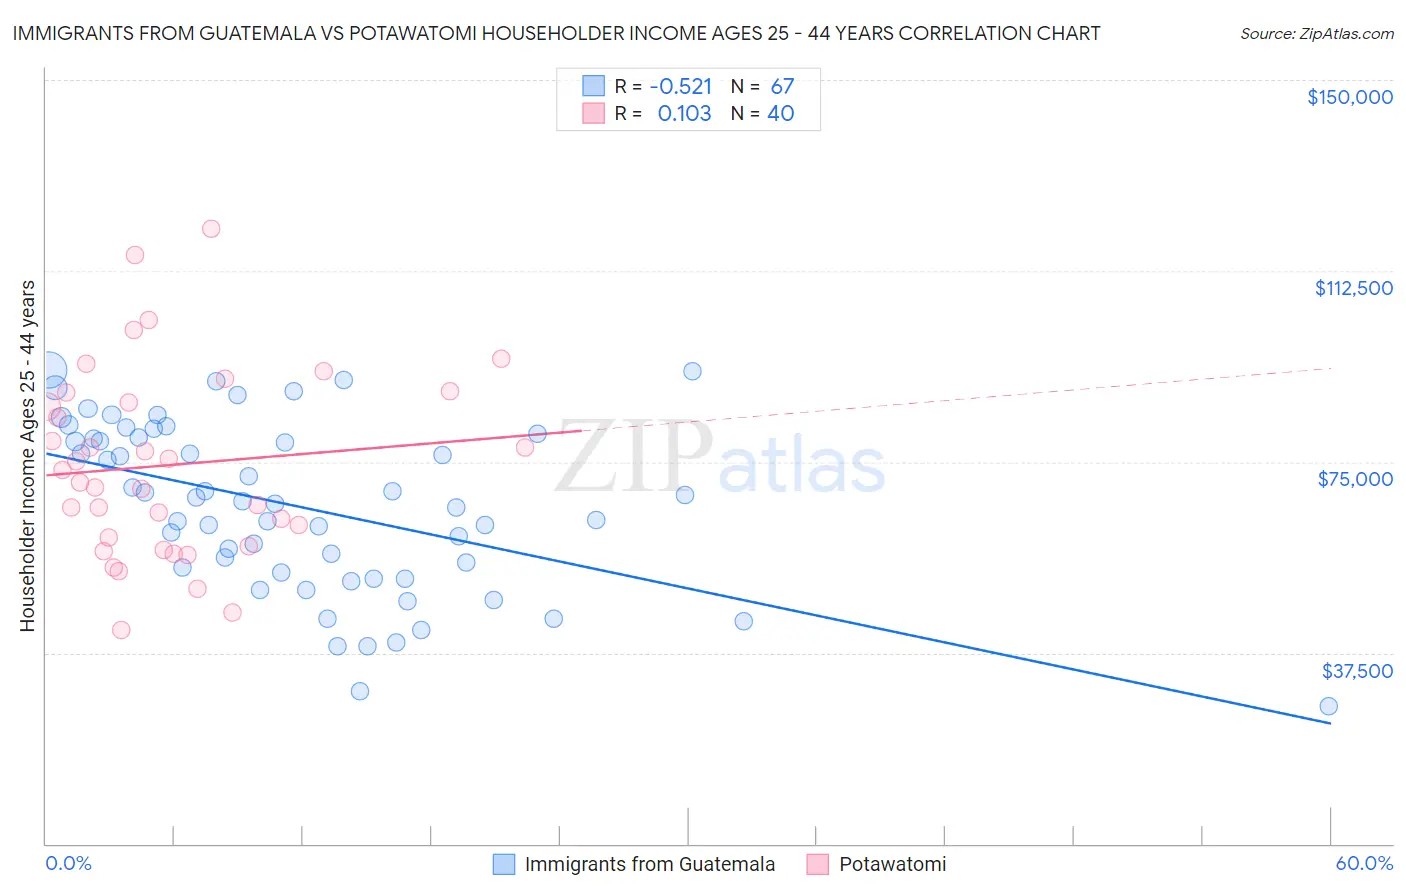 Immigrants from Guatemala vs Potawatomi Householder Income Ages 25 - 44 years